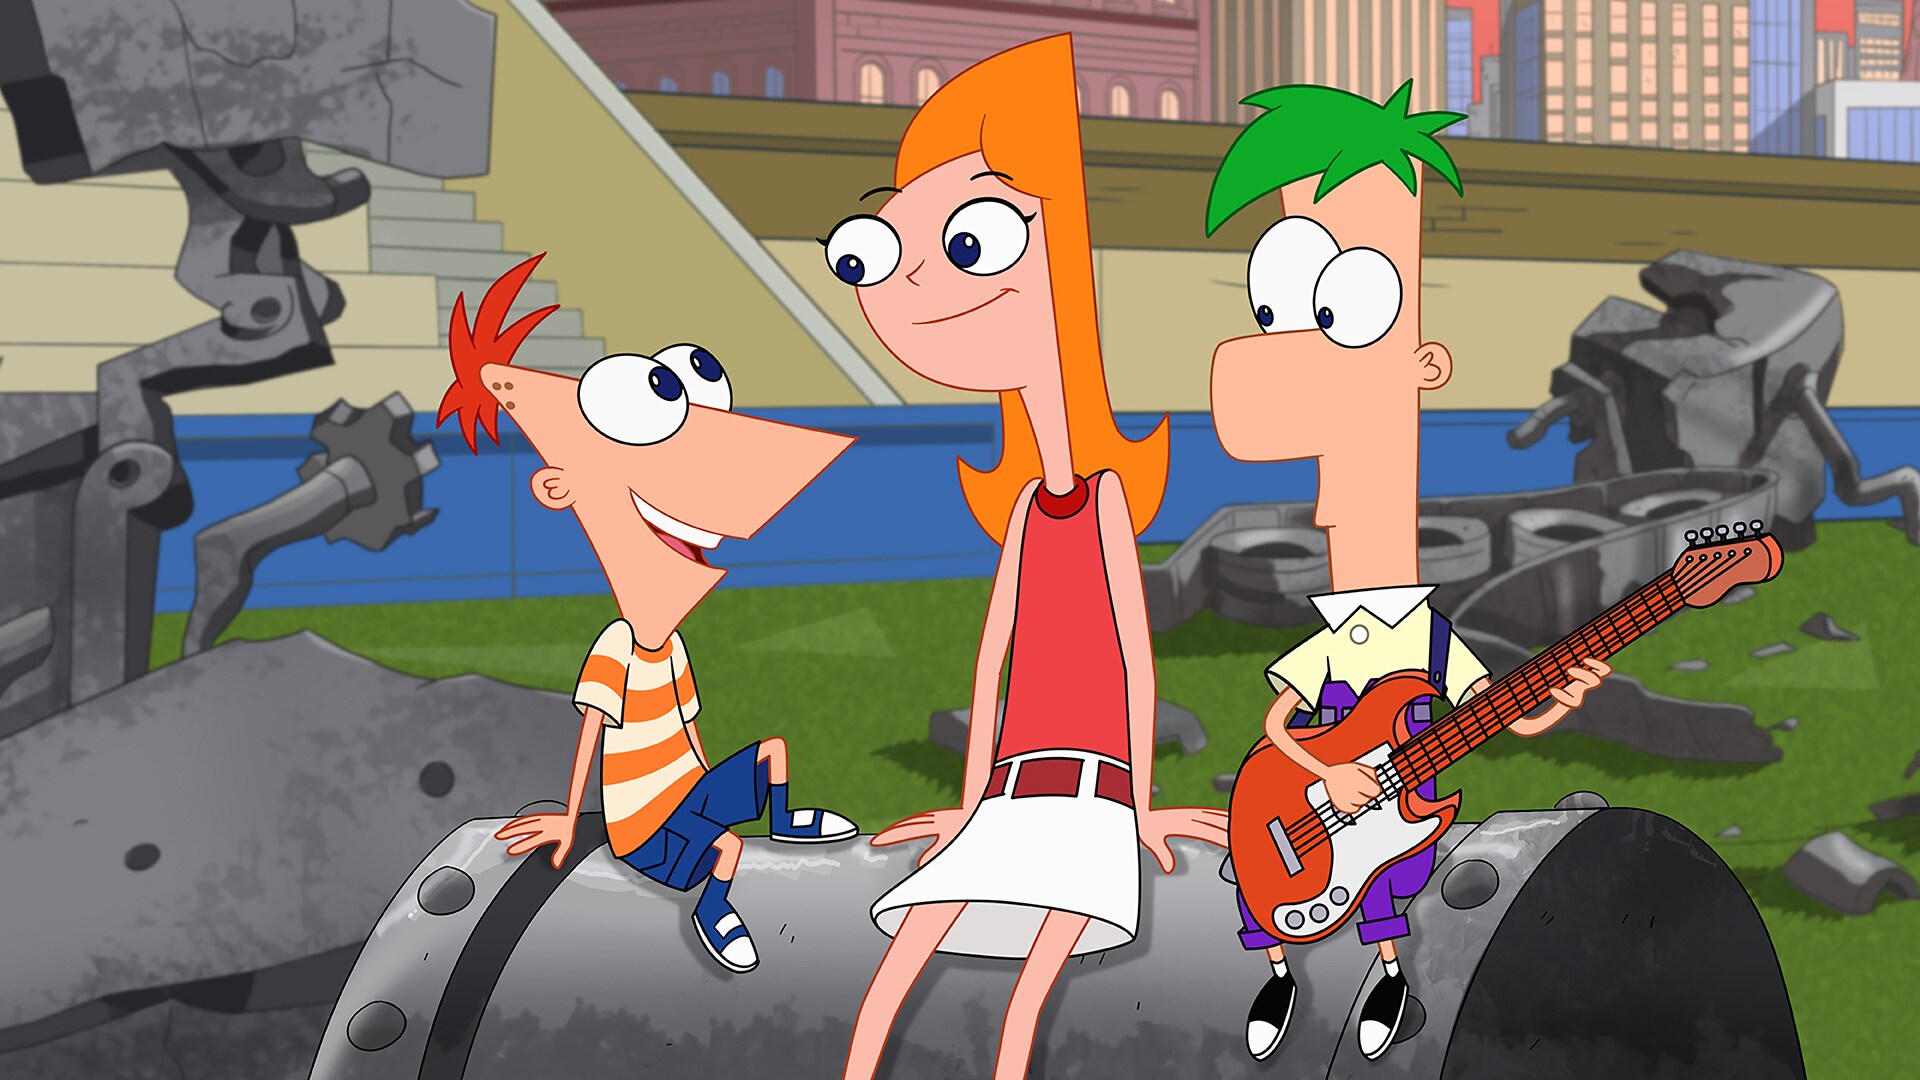 bonni davis recommends Pictures Of Ferb From Phineas And Ferb